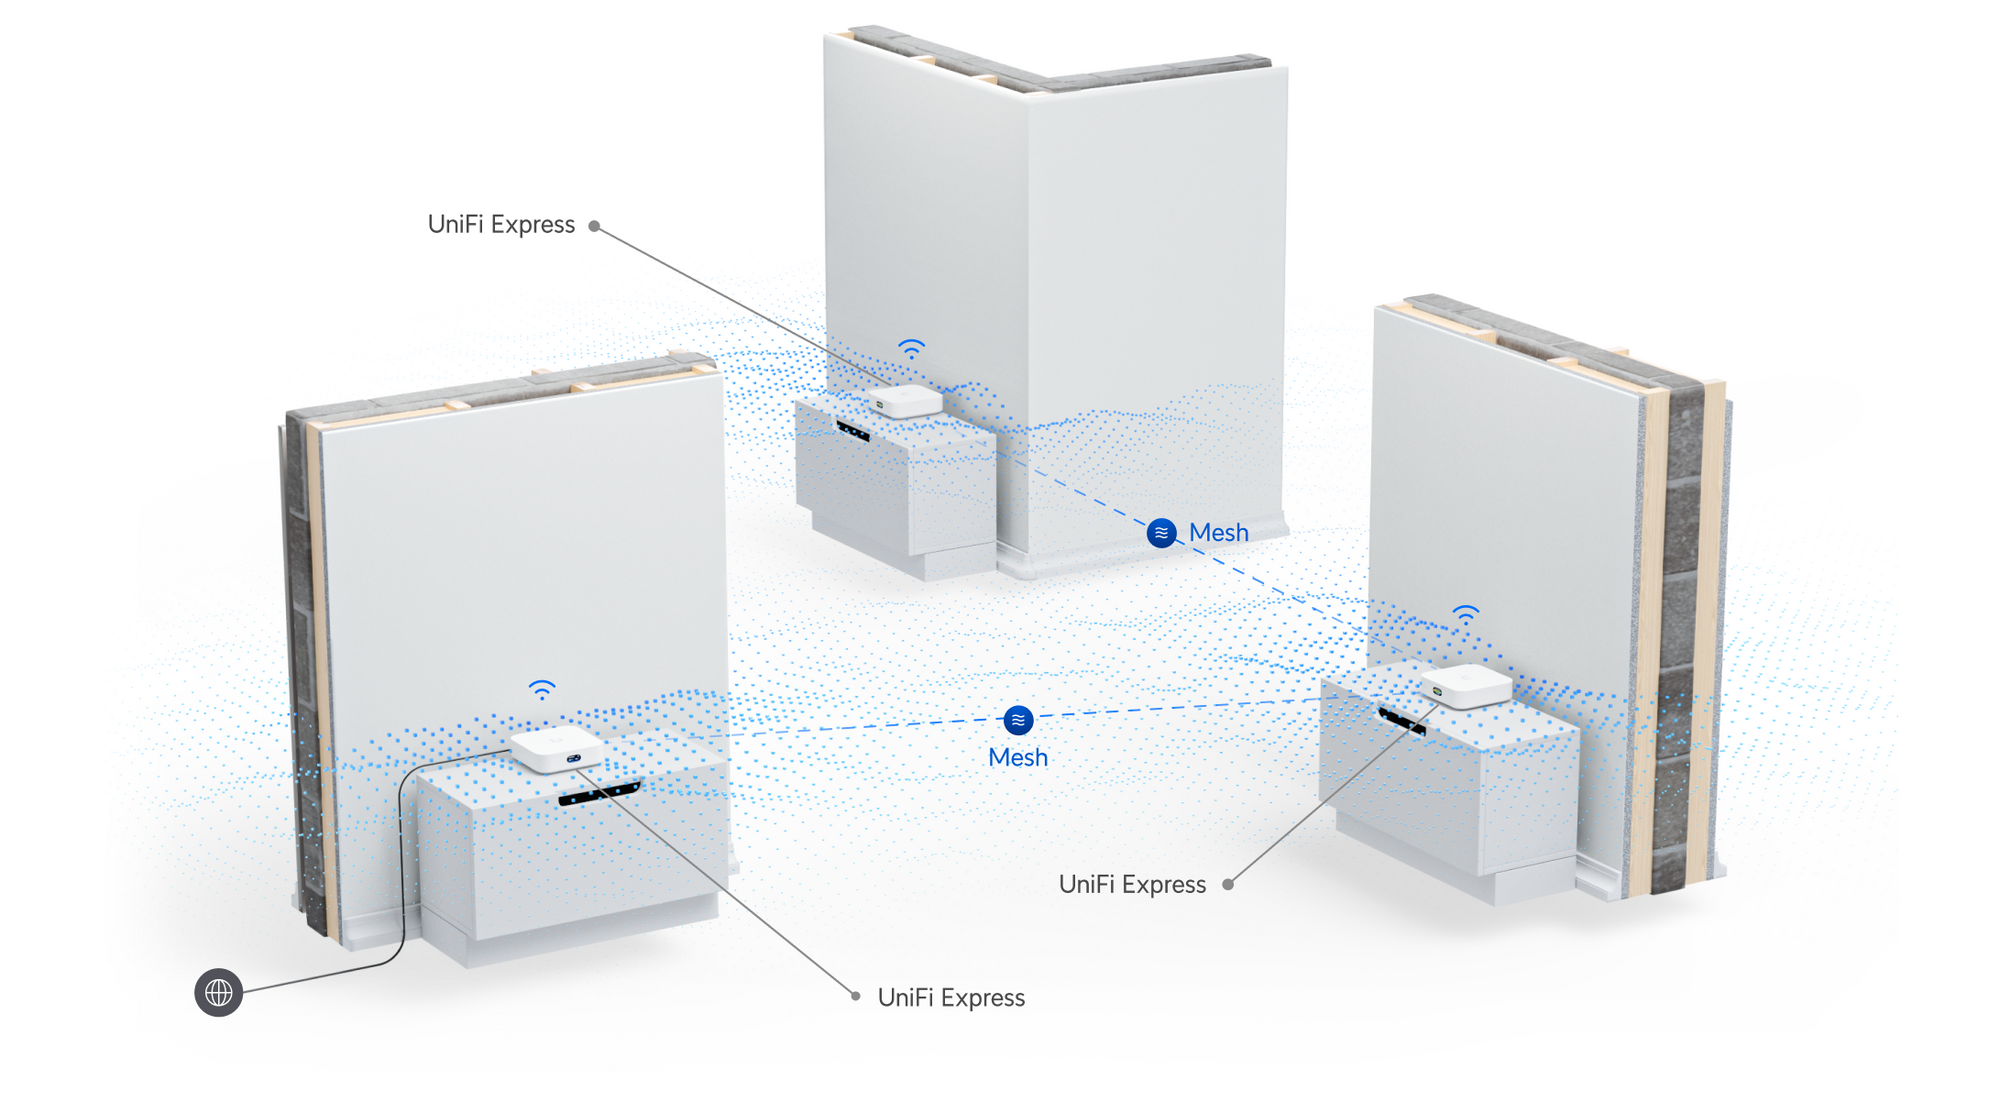 Hi when will you release the unifi express?